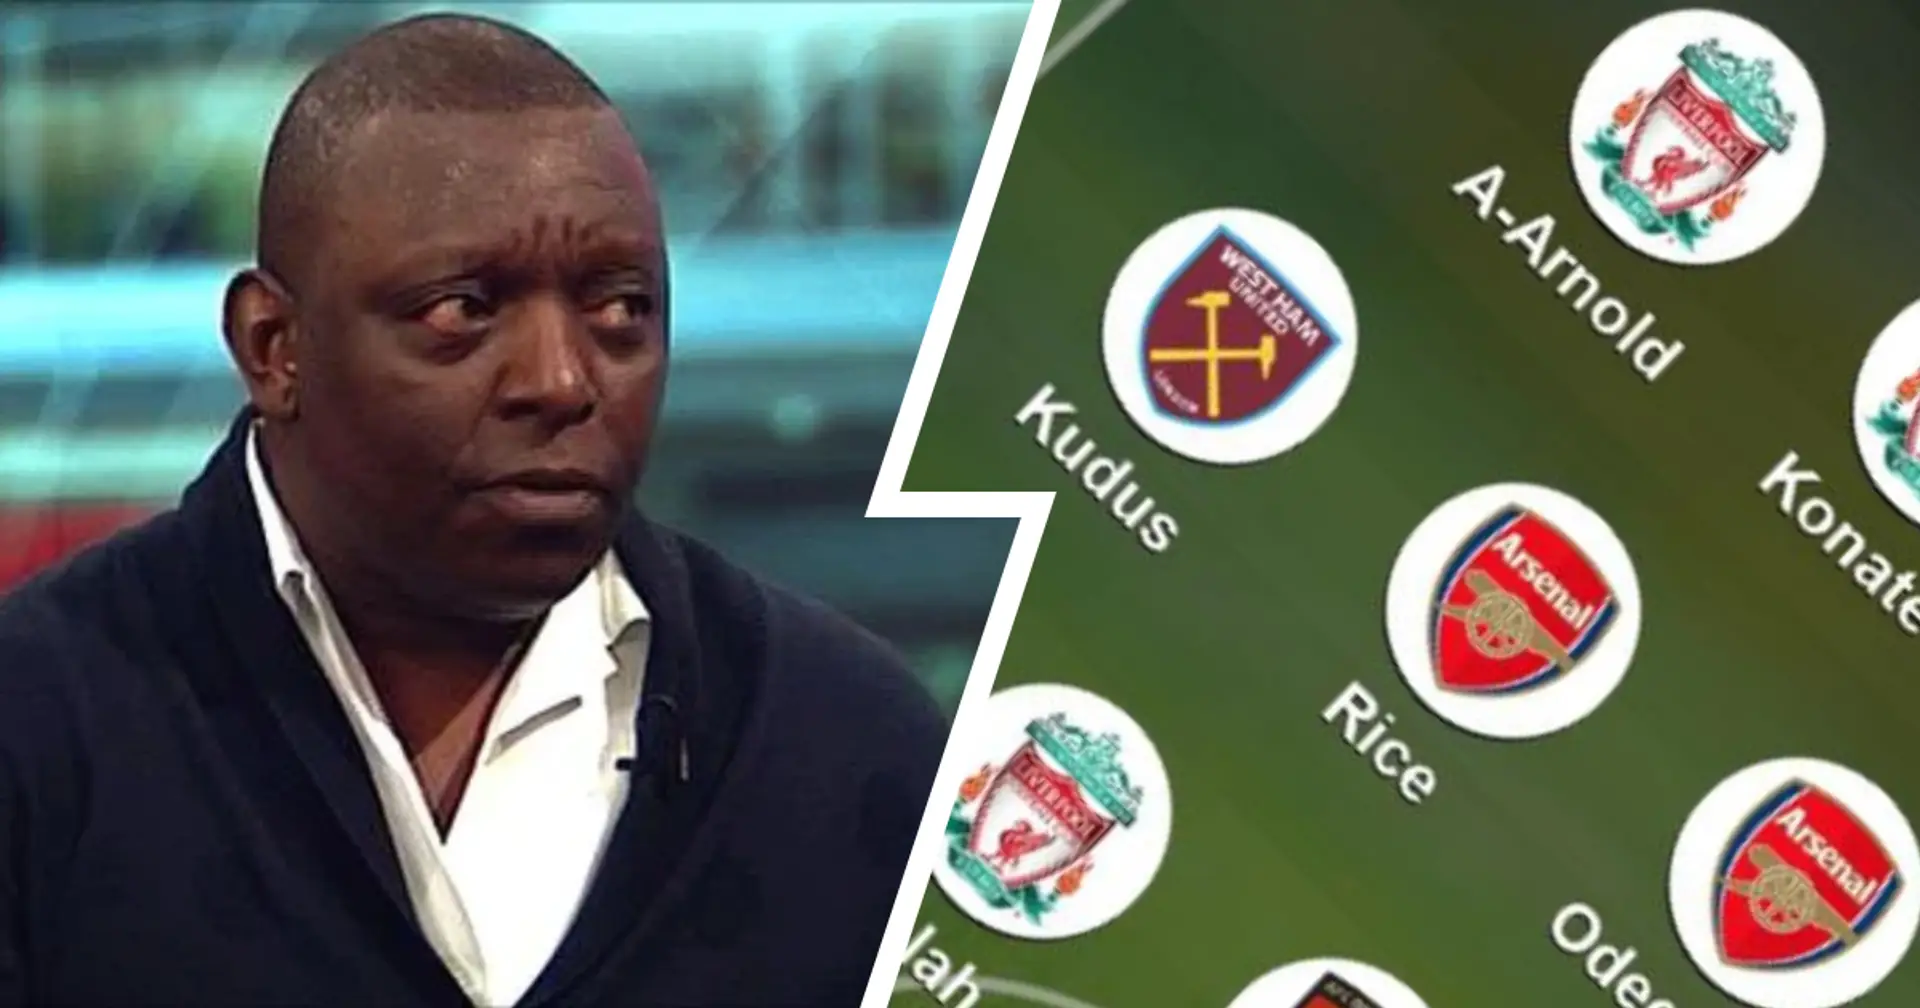 'Not good enough': Garth Crooks slams Man United and picks 3 West Ham players for his Team of the Week